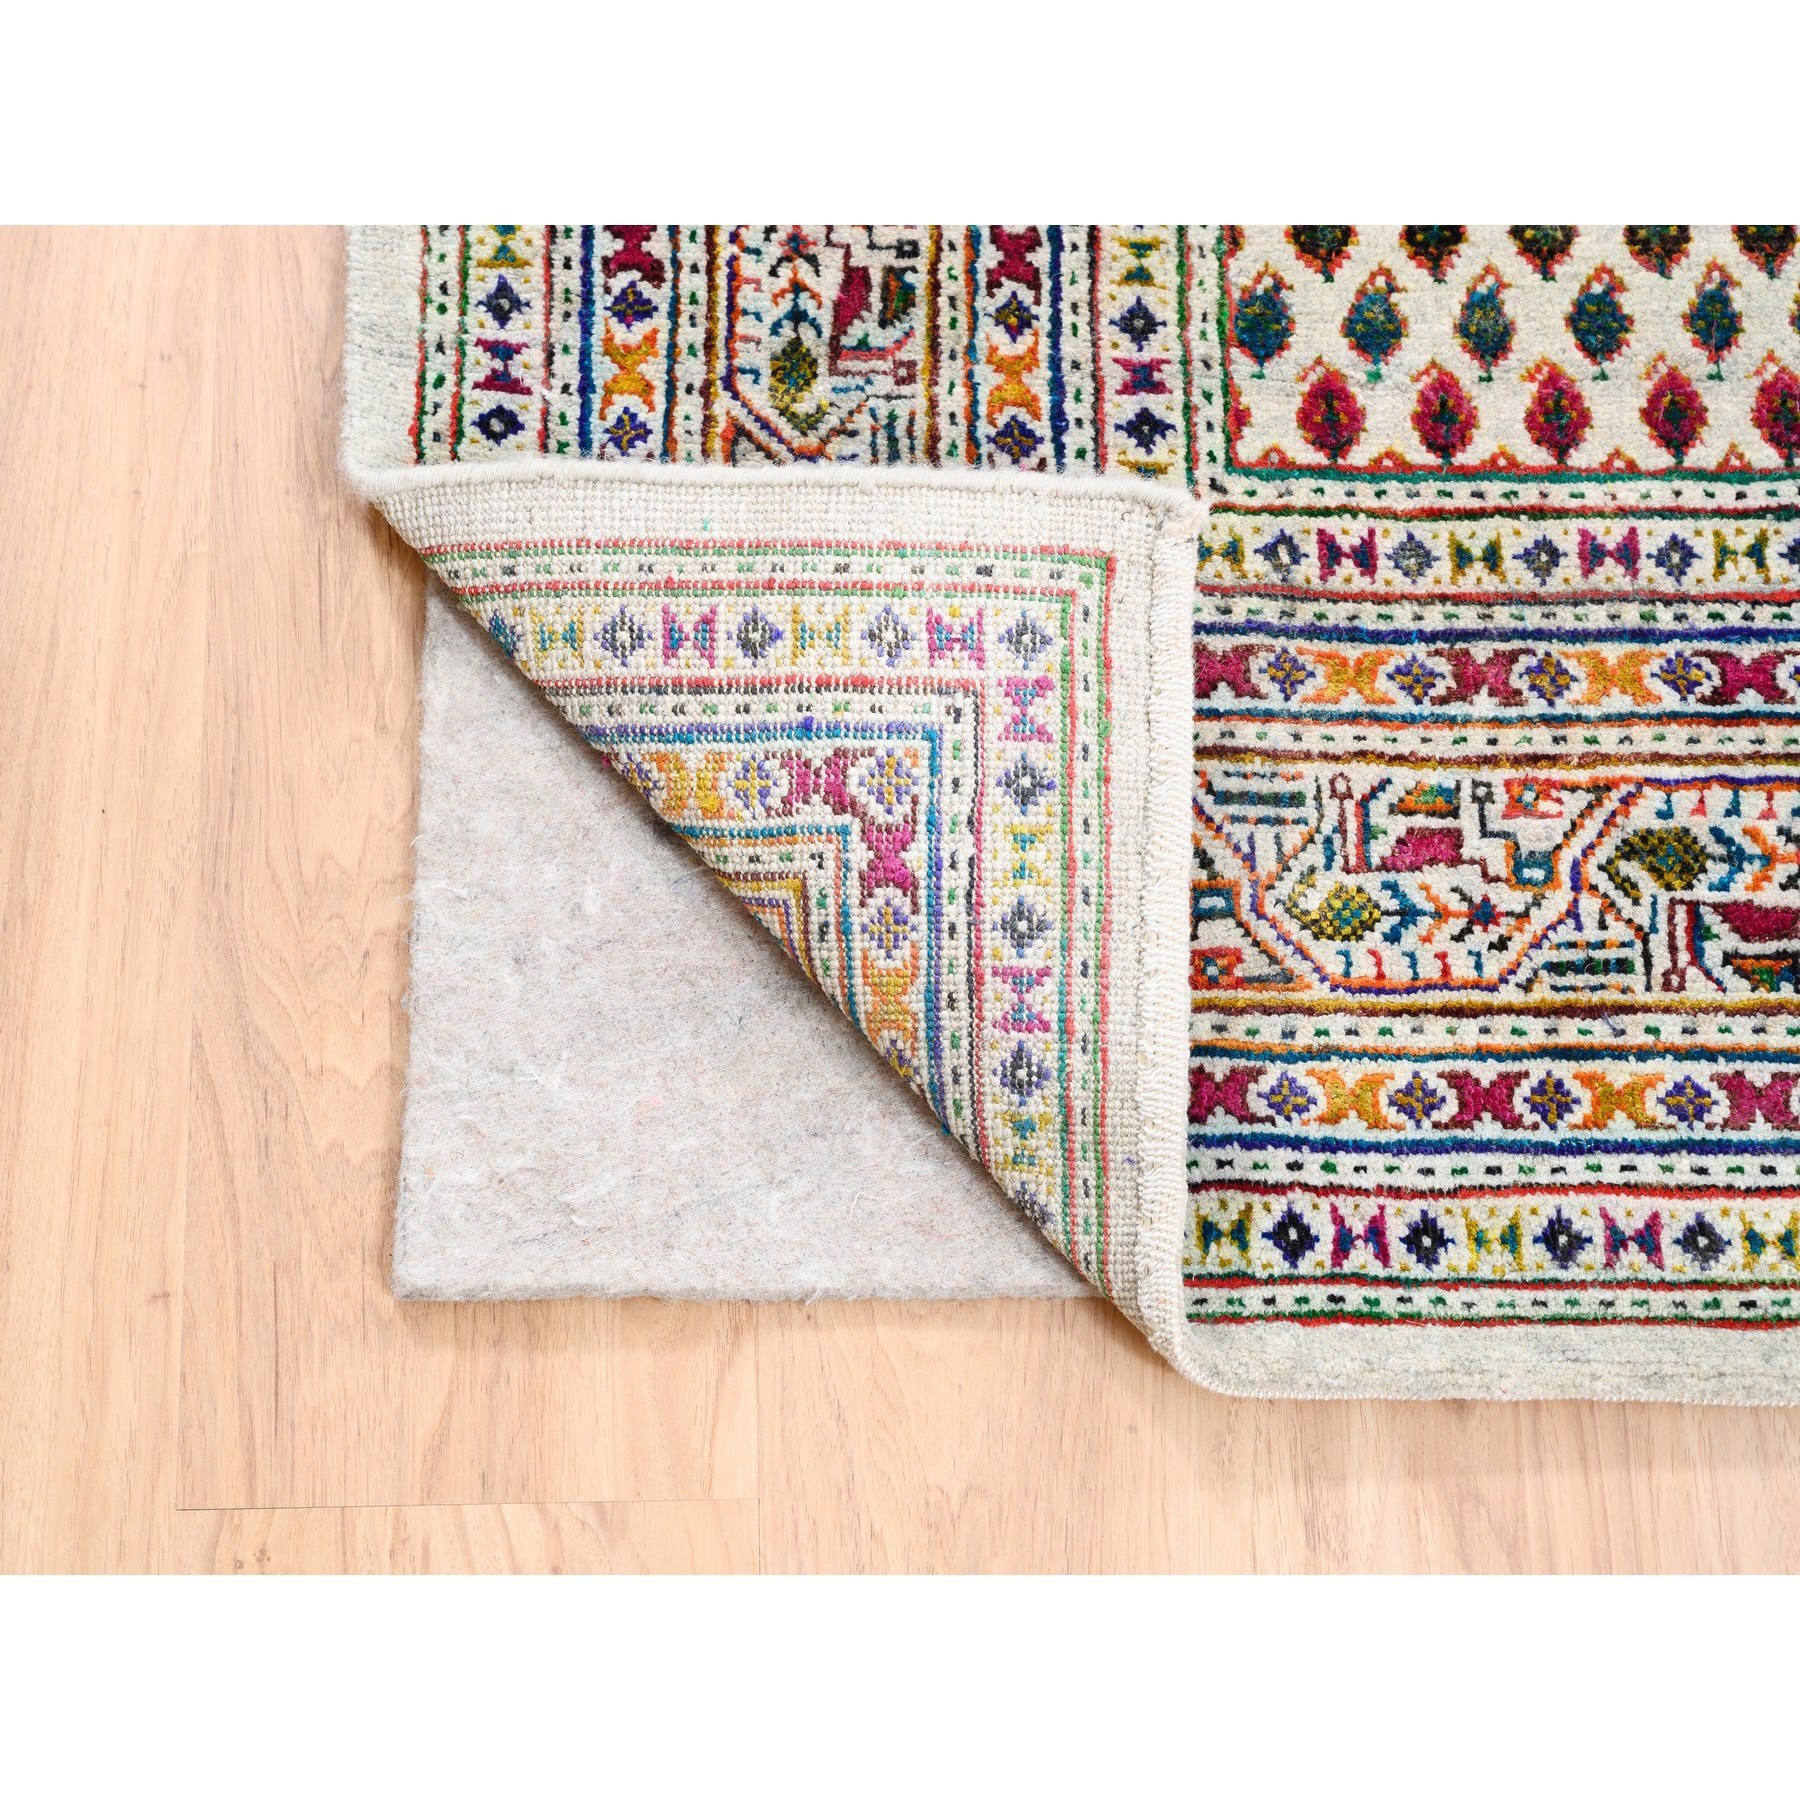 5'10"x9' Colorful Wool And Sari Silk Sarouk Mir Inspired With Repetitive Boteh Design Hand Woven Oriental Rug 